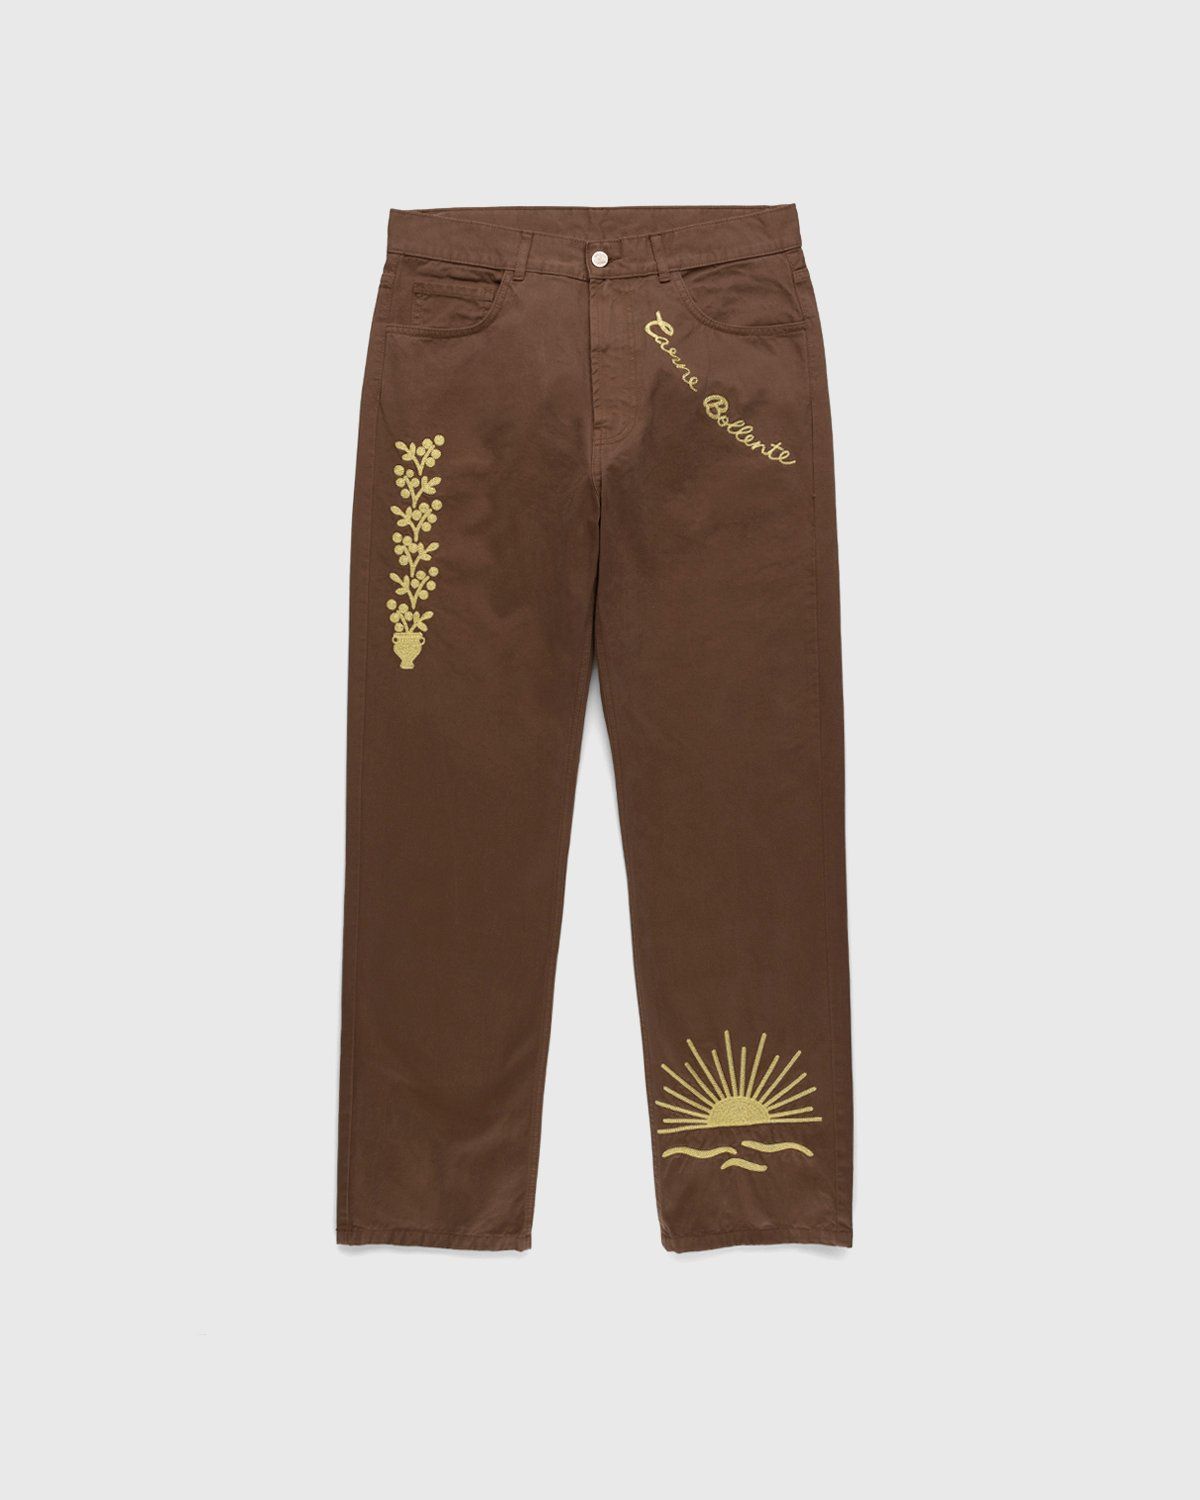 Carne Bollente – The Back Bump Trouser Brown - Image 1